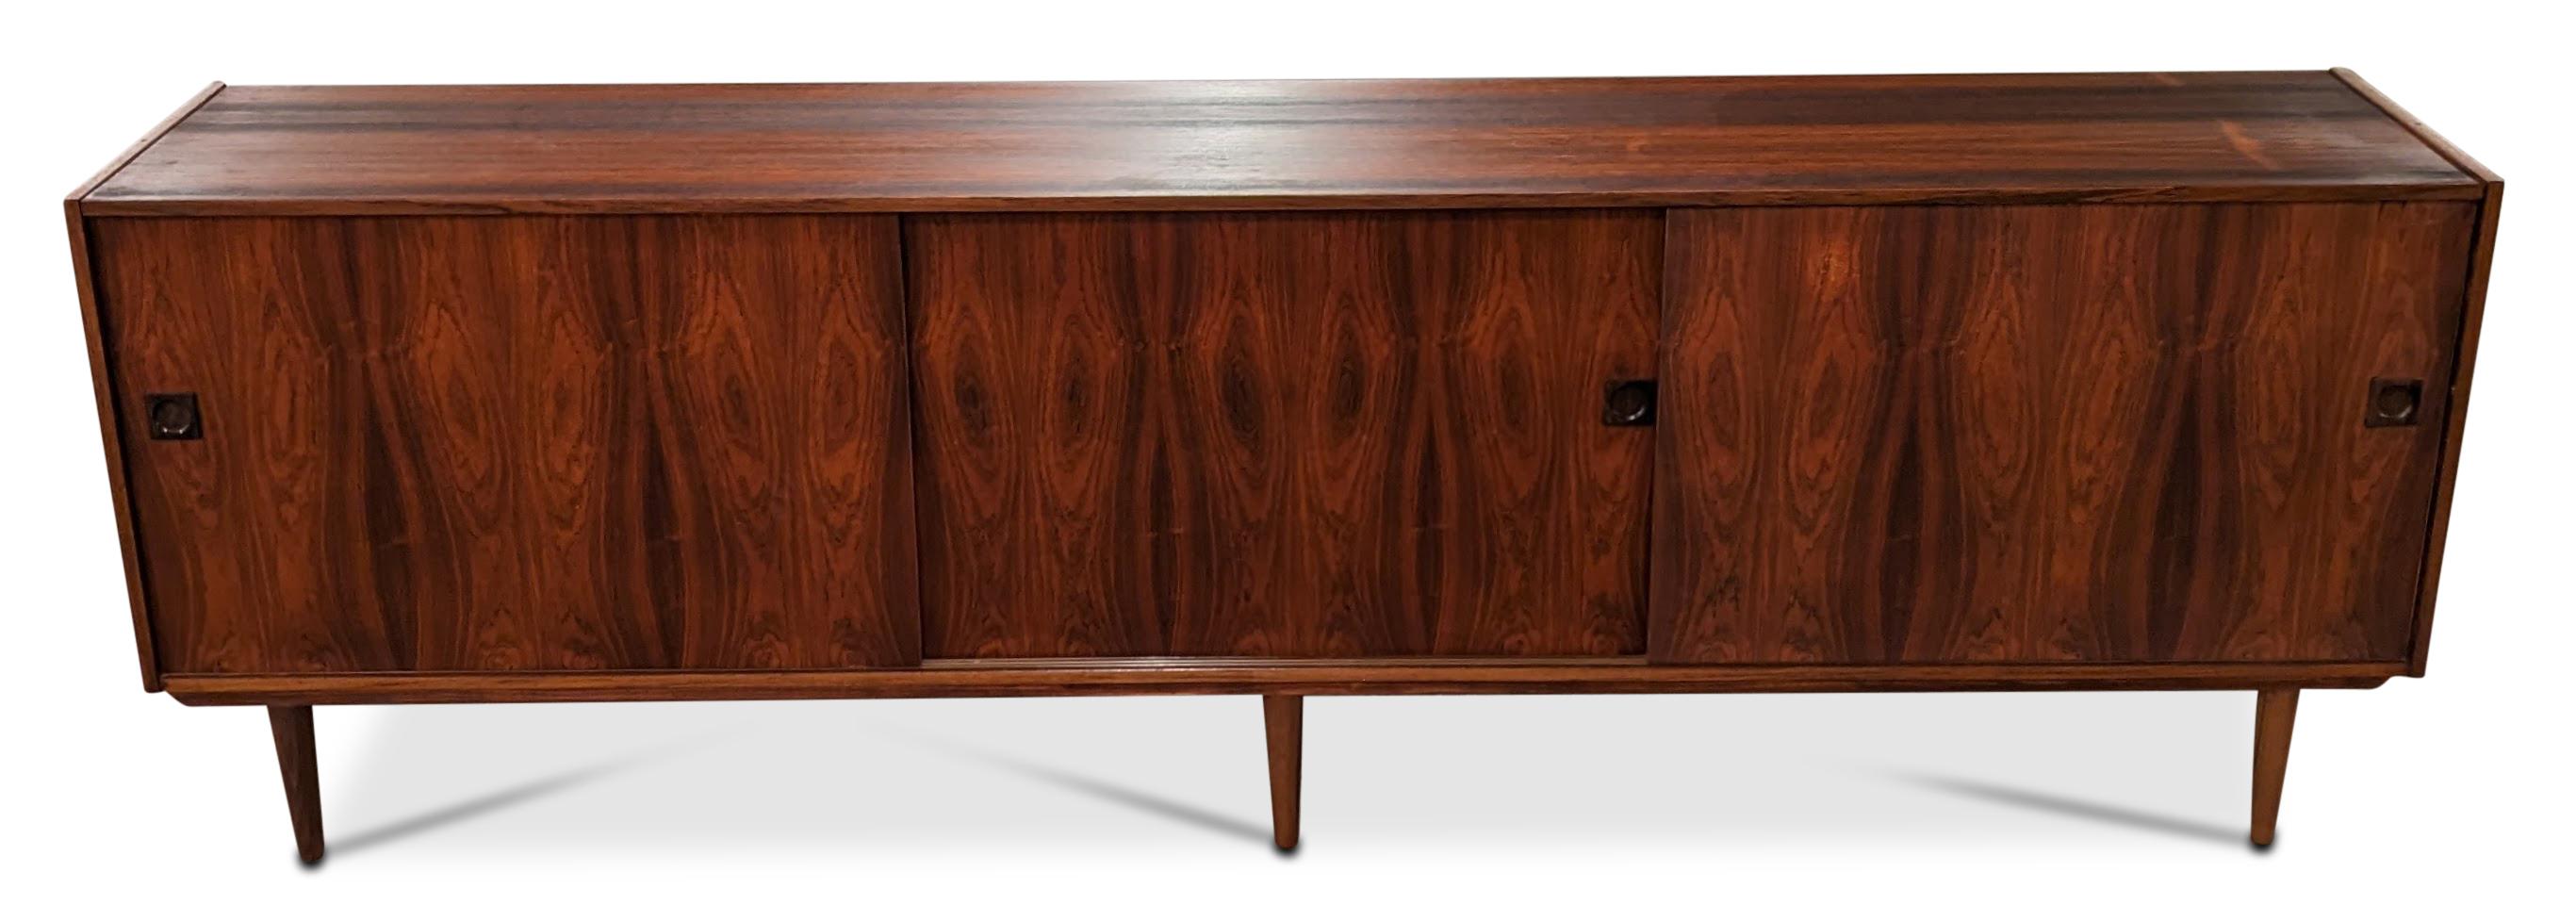 XL Rosewood Sideboard, Vintage Danish Mid Century 122254 In Good Condition In Jersey City, NJ